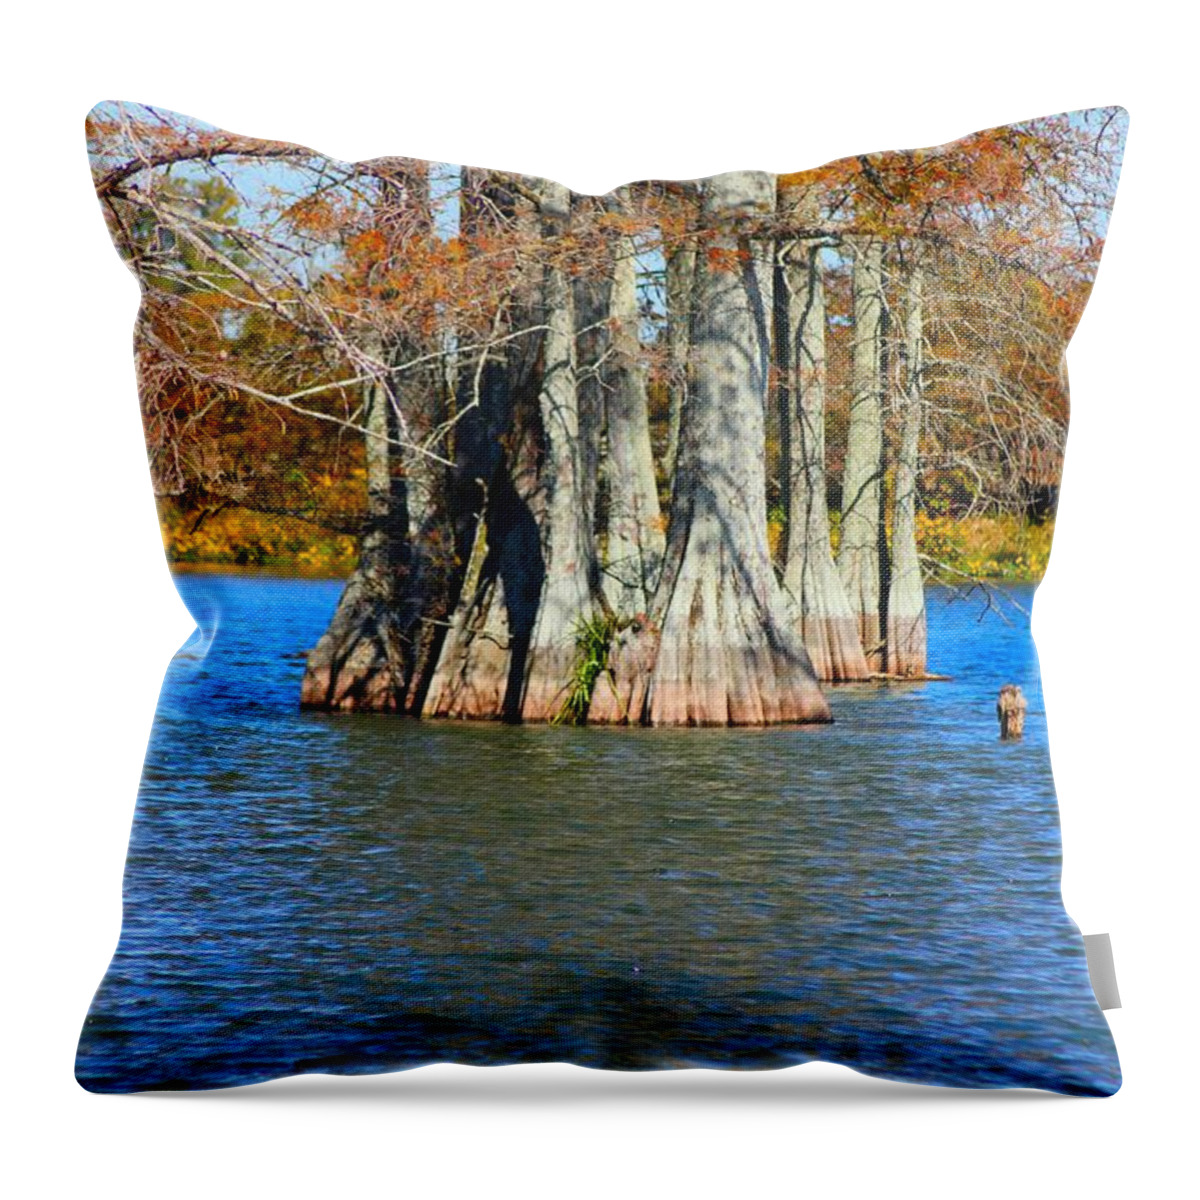 Water Throw Pillow featuring the photograph Cypress Birdhouse by Karen Wagner